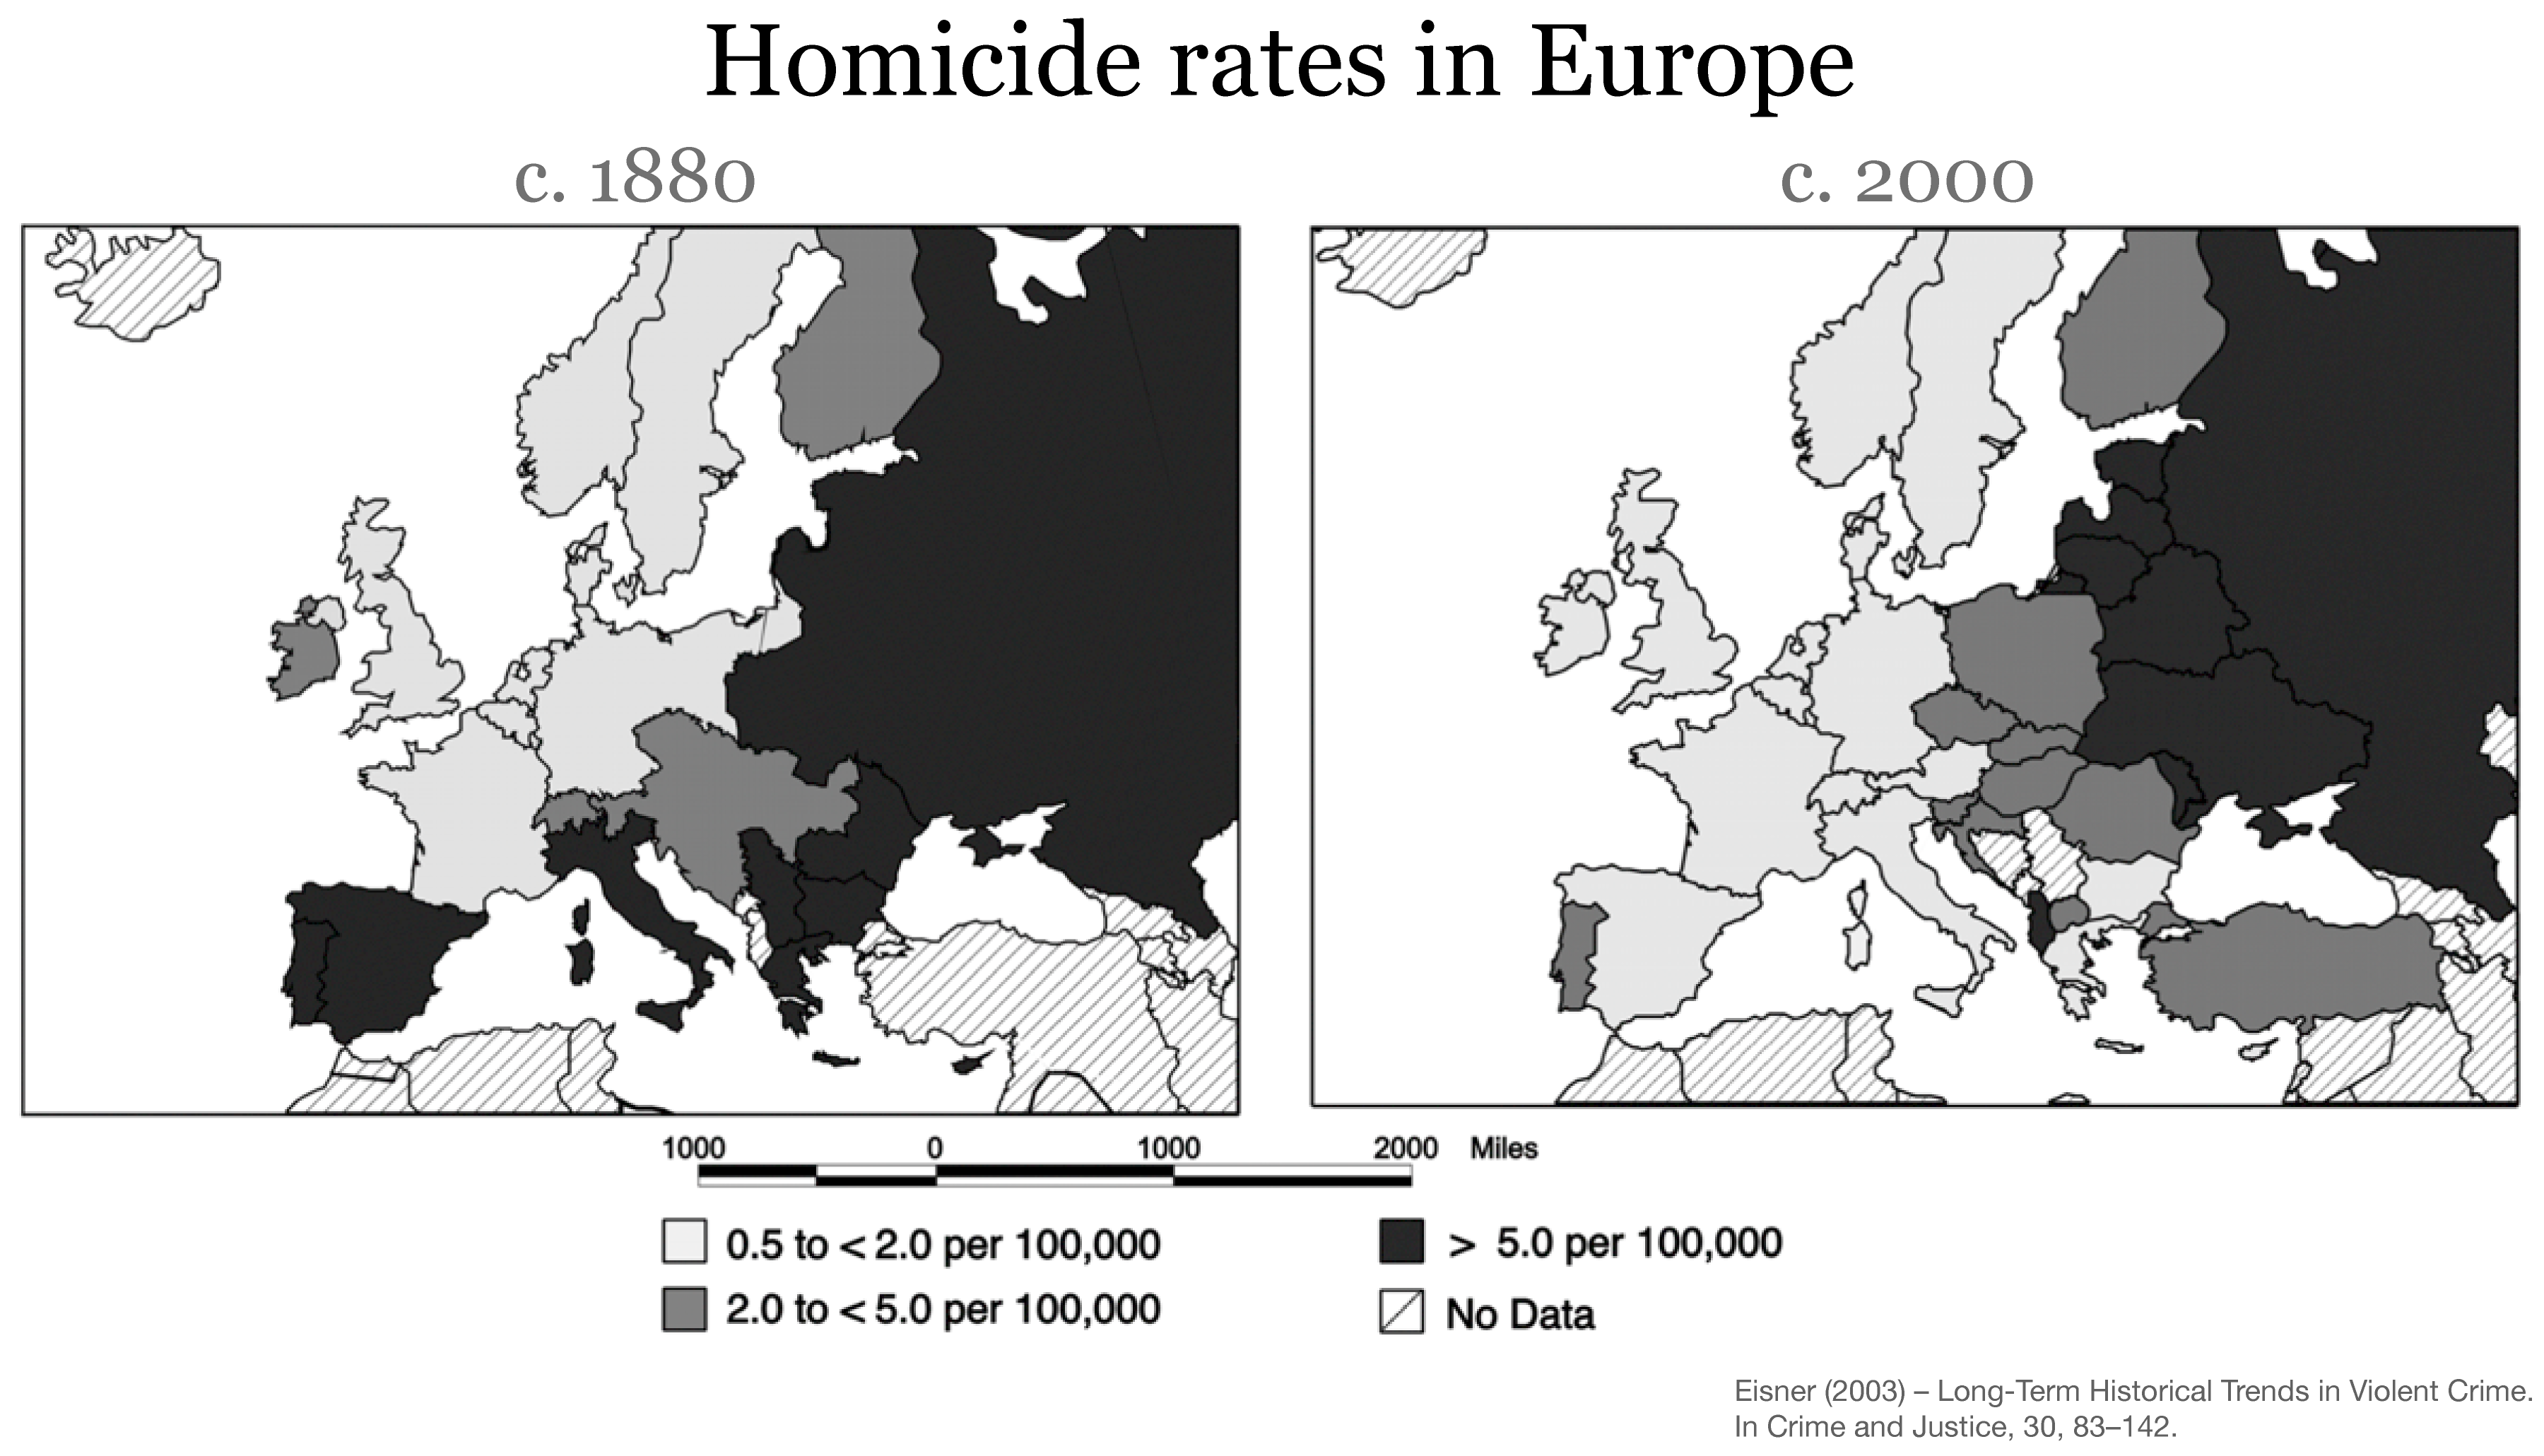 ourworldindata_homicide-rates-in-europe-map.png